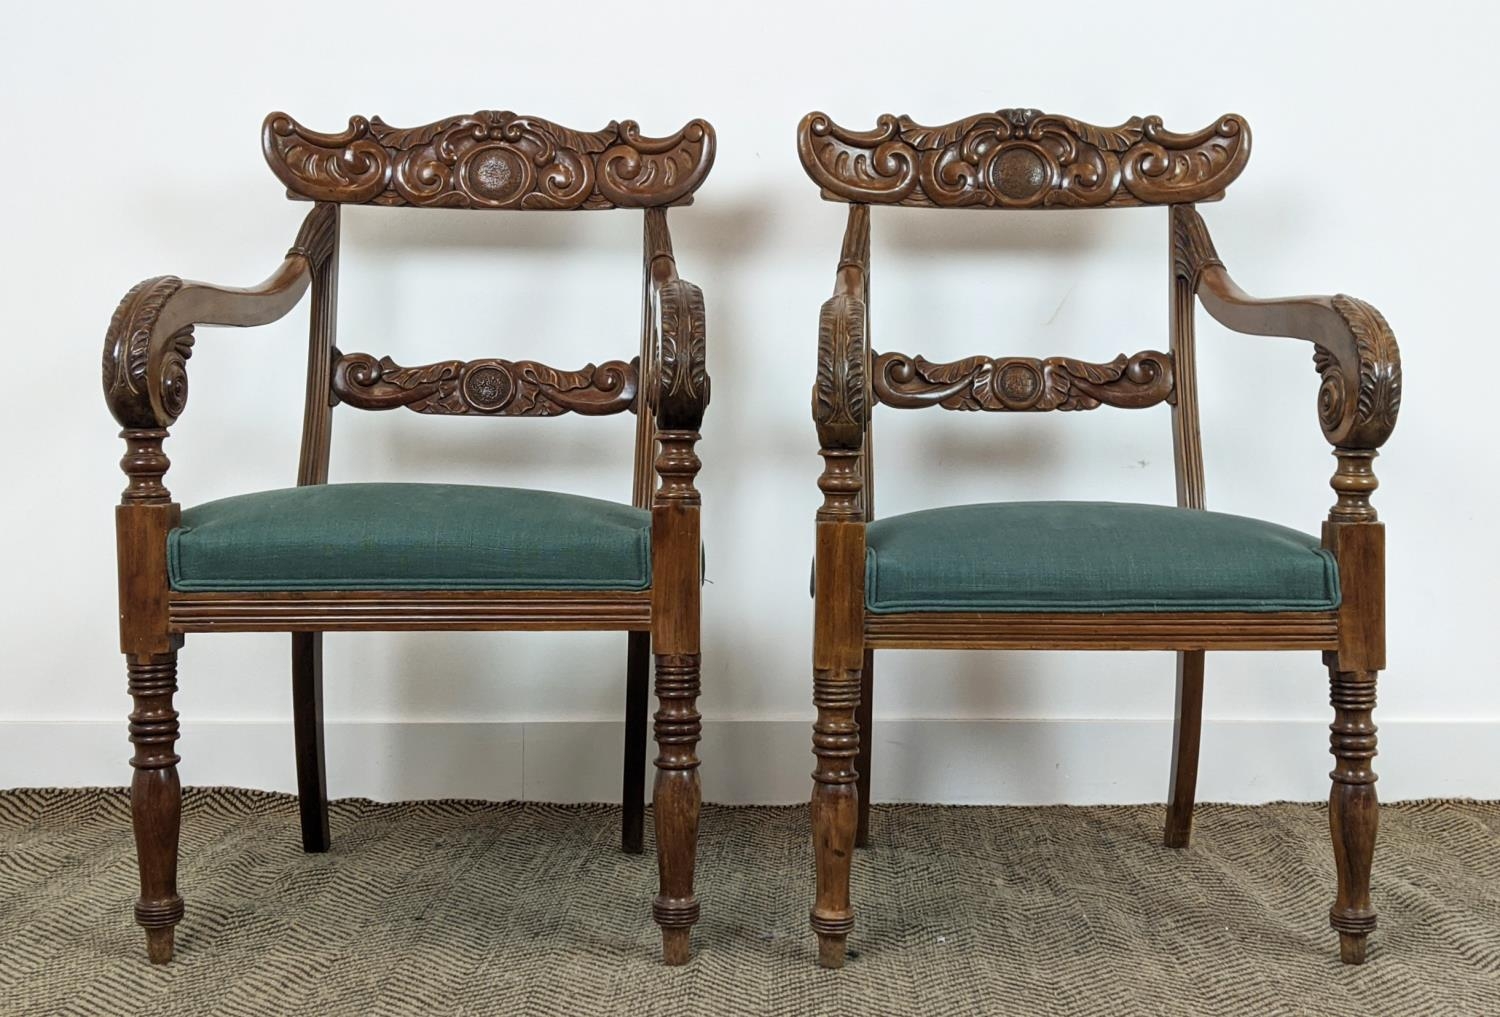 ARMCHAIRS, a pair, mid 19th century mahogany with green stuffover seats, 91cm H x 58cm x 58cm. (2) - Image 6 of 18